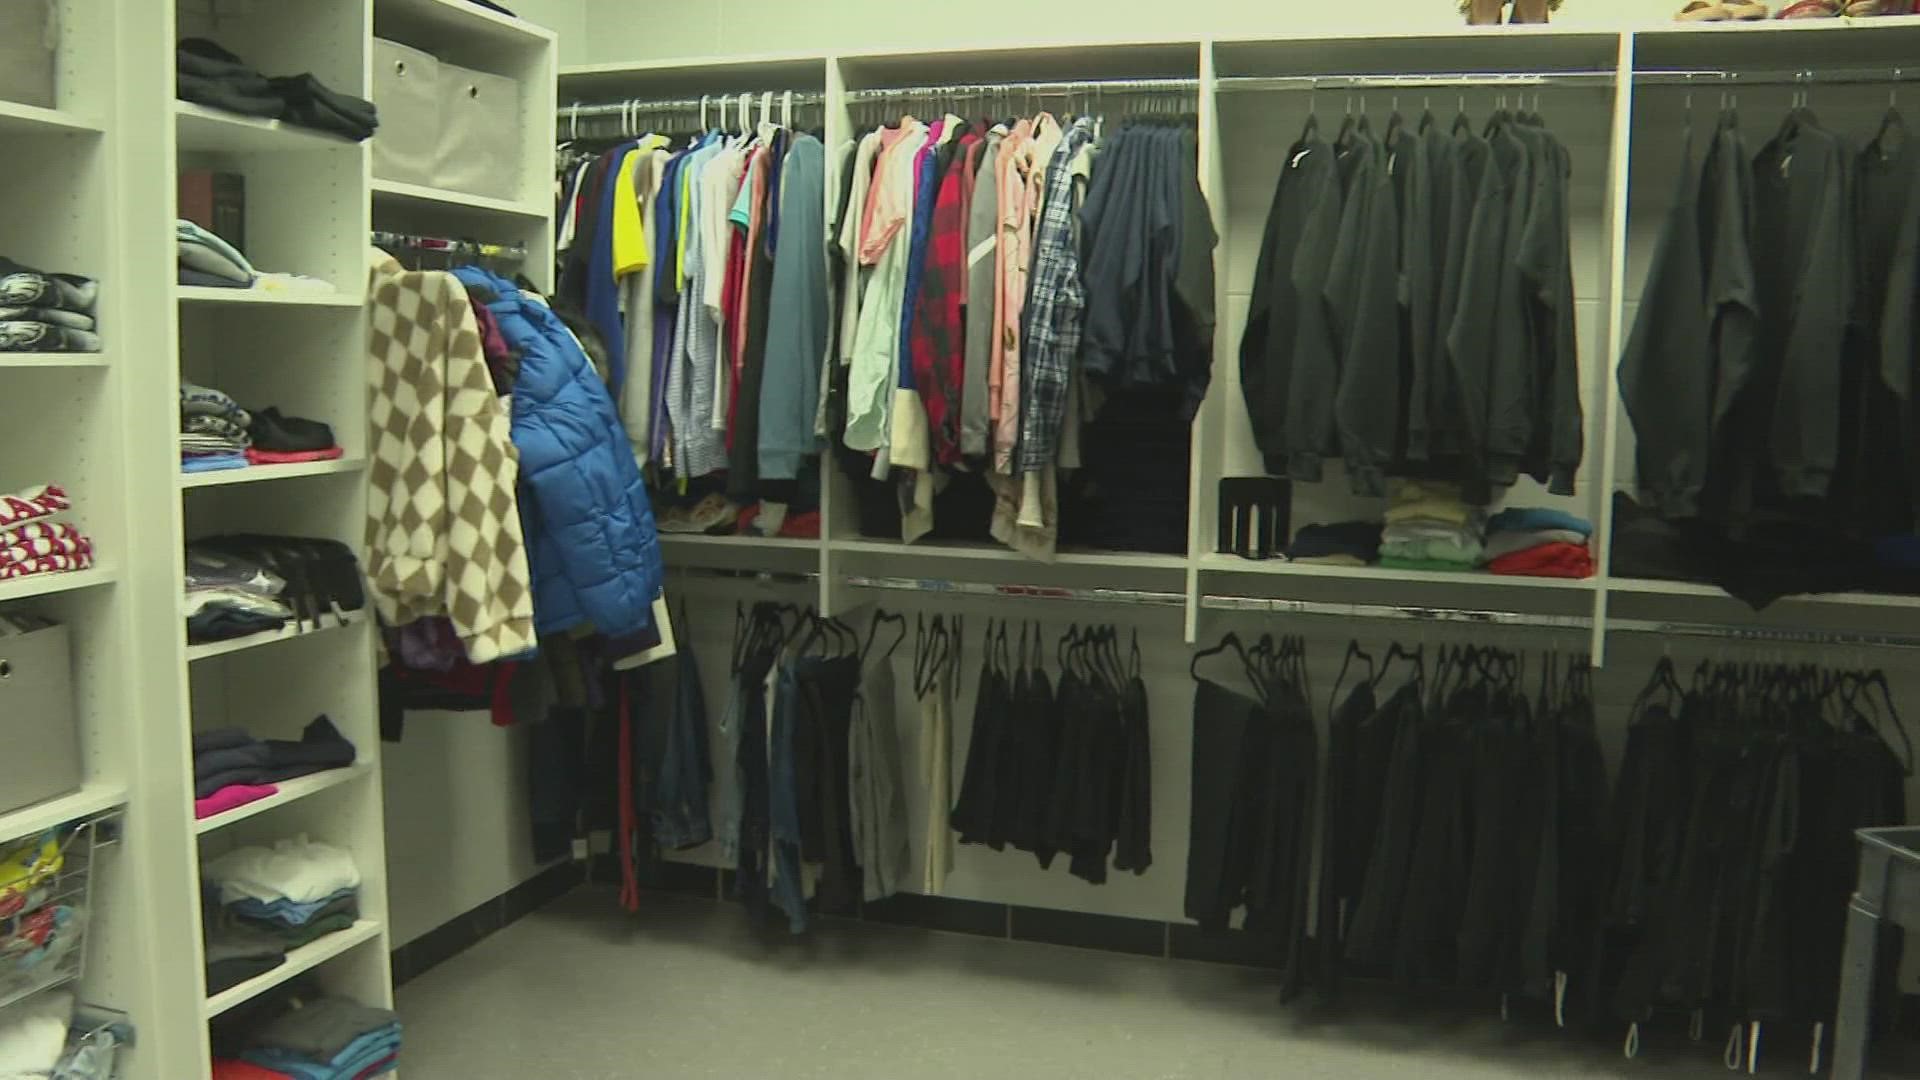 The Newburg Closet opened last year and provides students with access to food, clothing and school supplies.